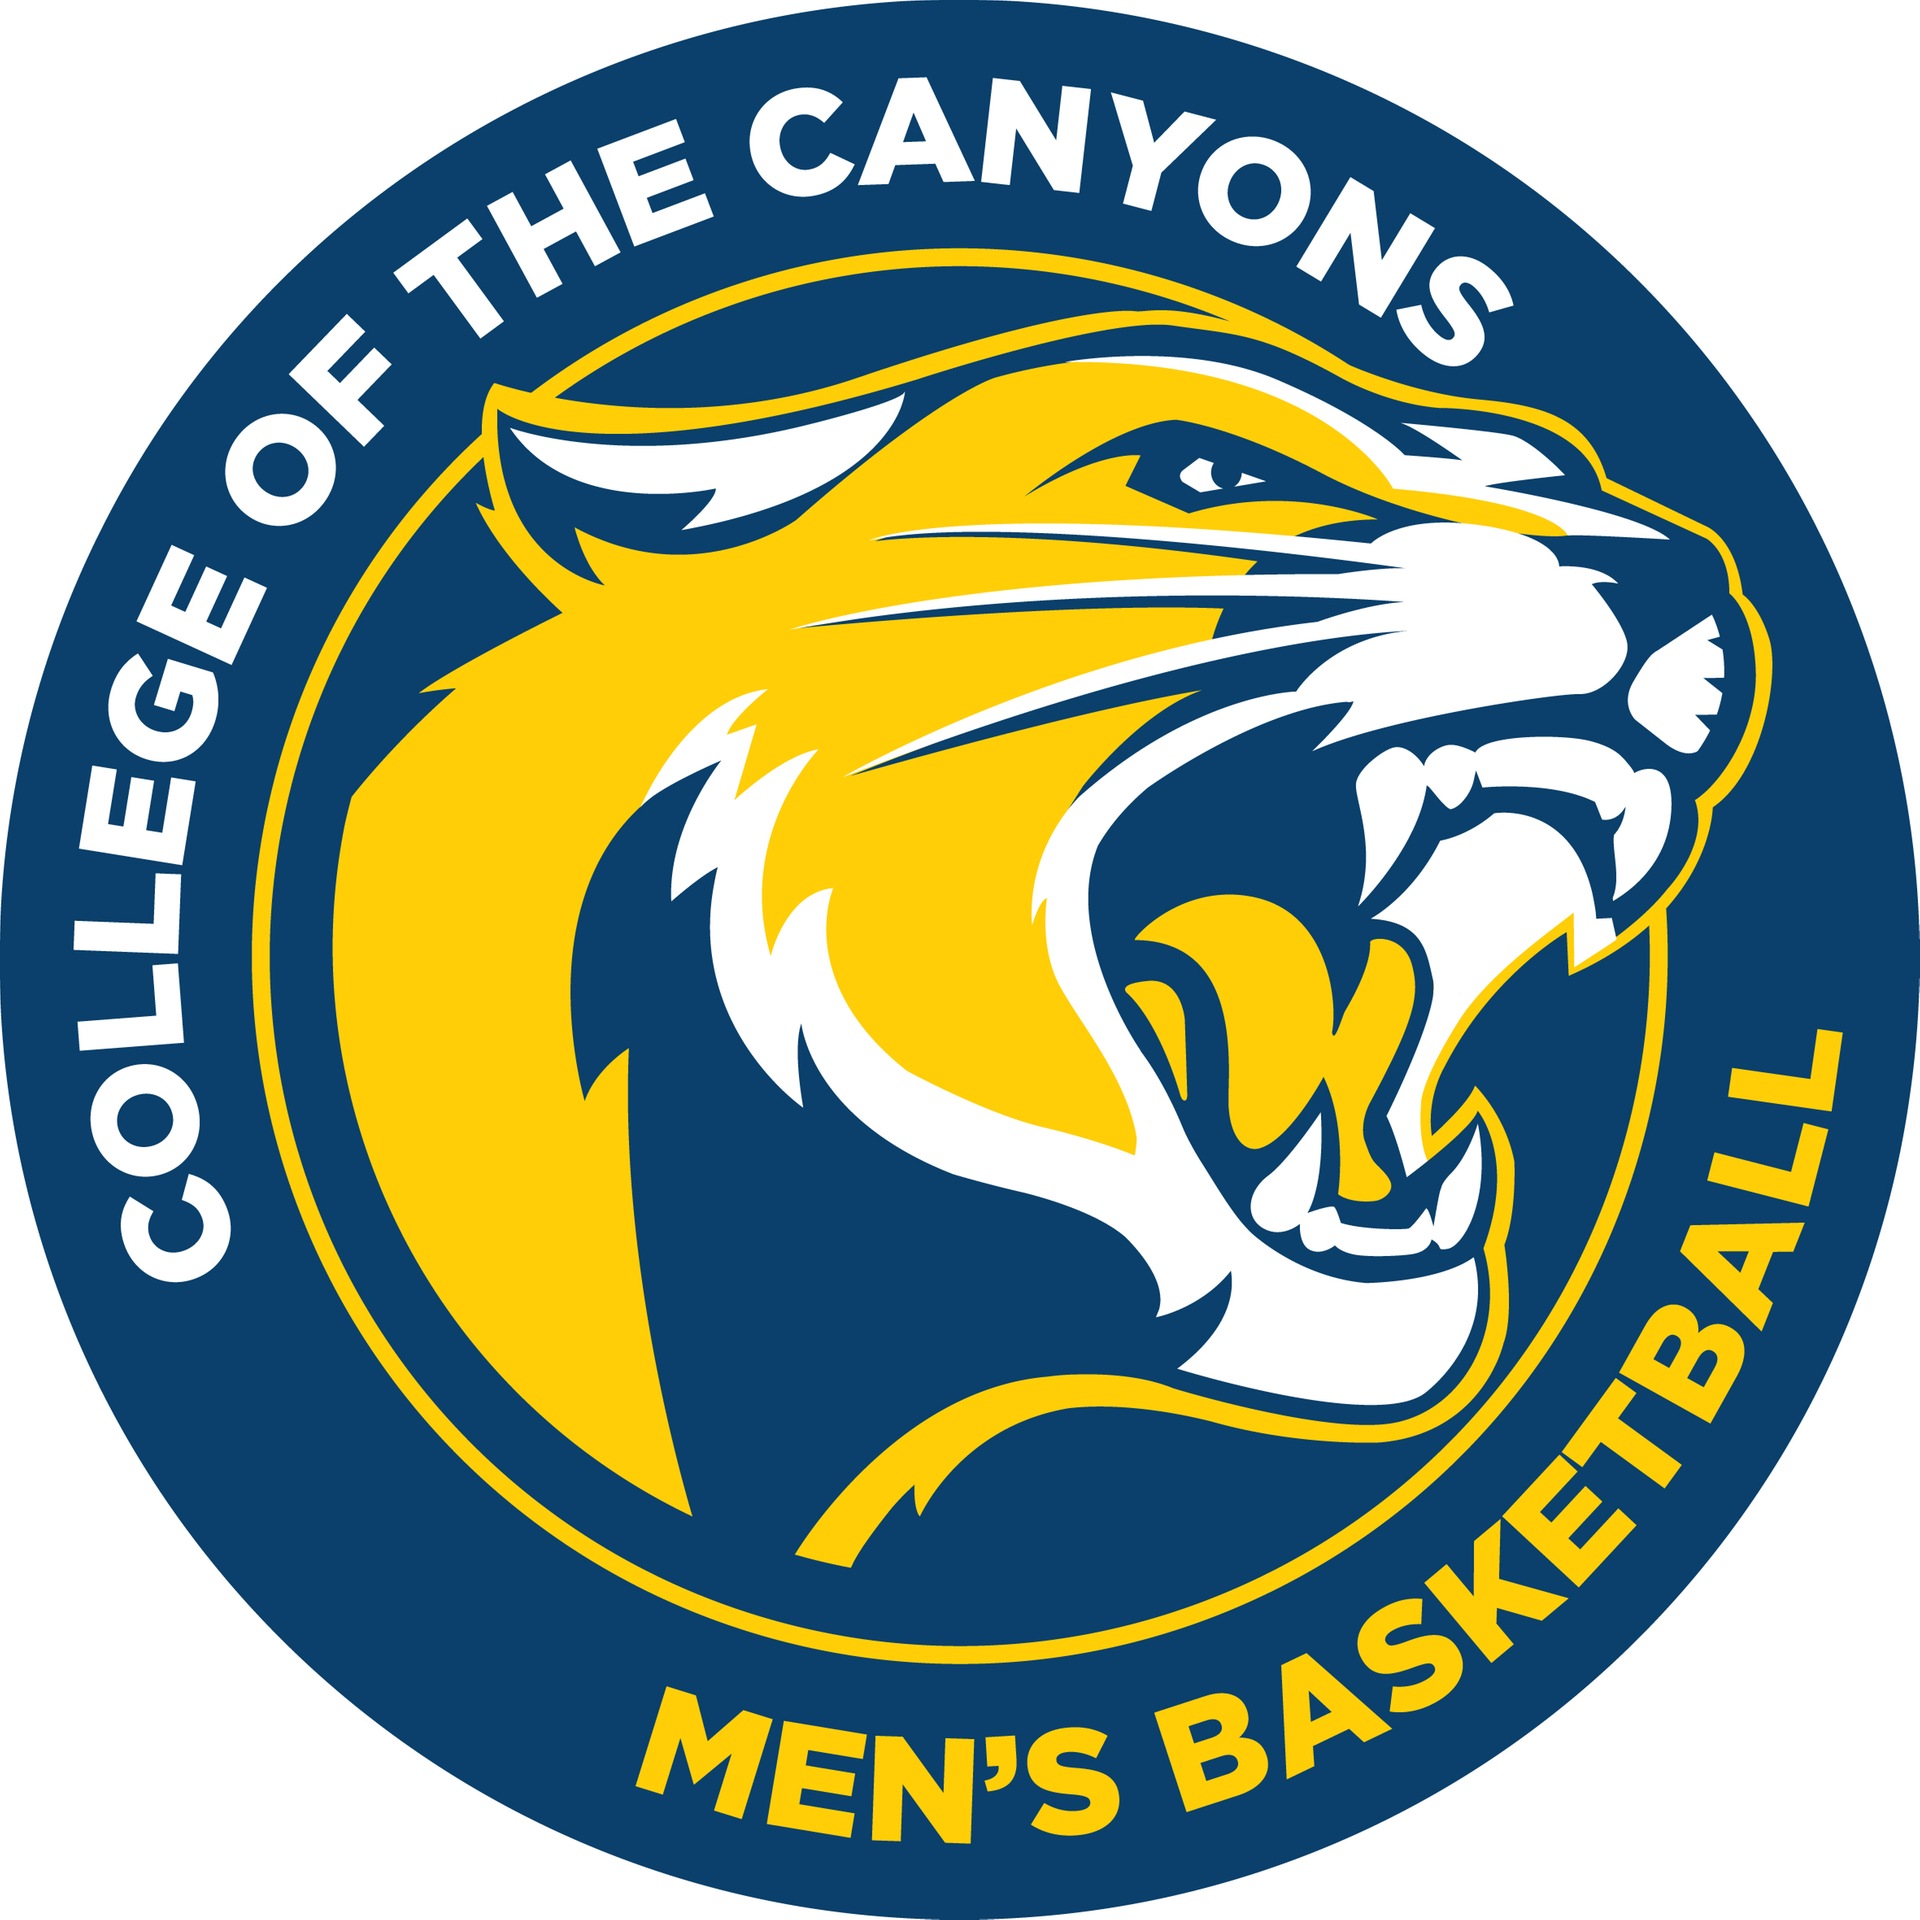 College of the Canyons men's basketball logo.